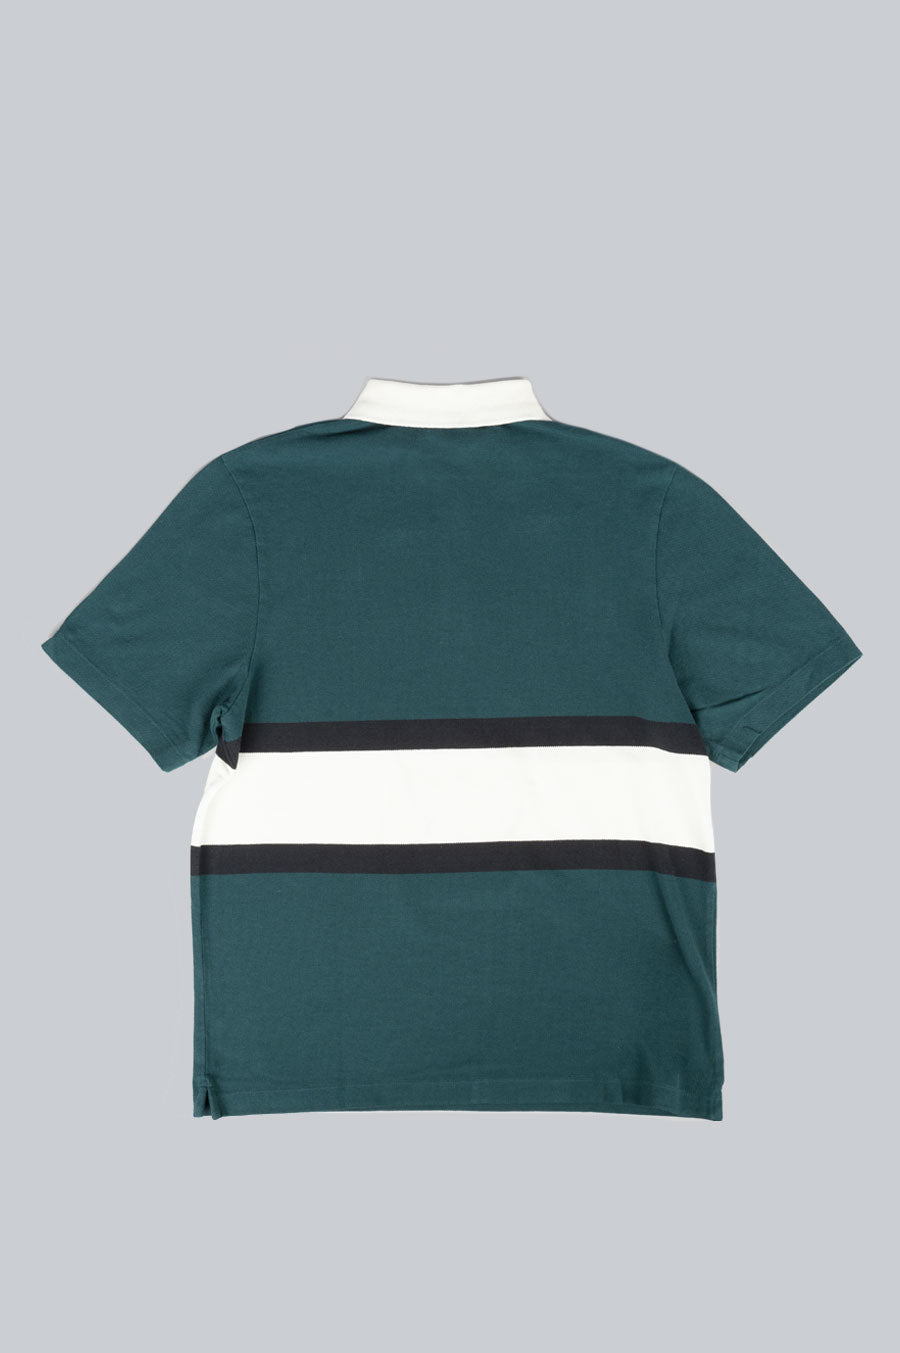 PARRA WINGED LOGO POLO SHIRT TEAL OFF WHITE